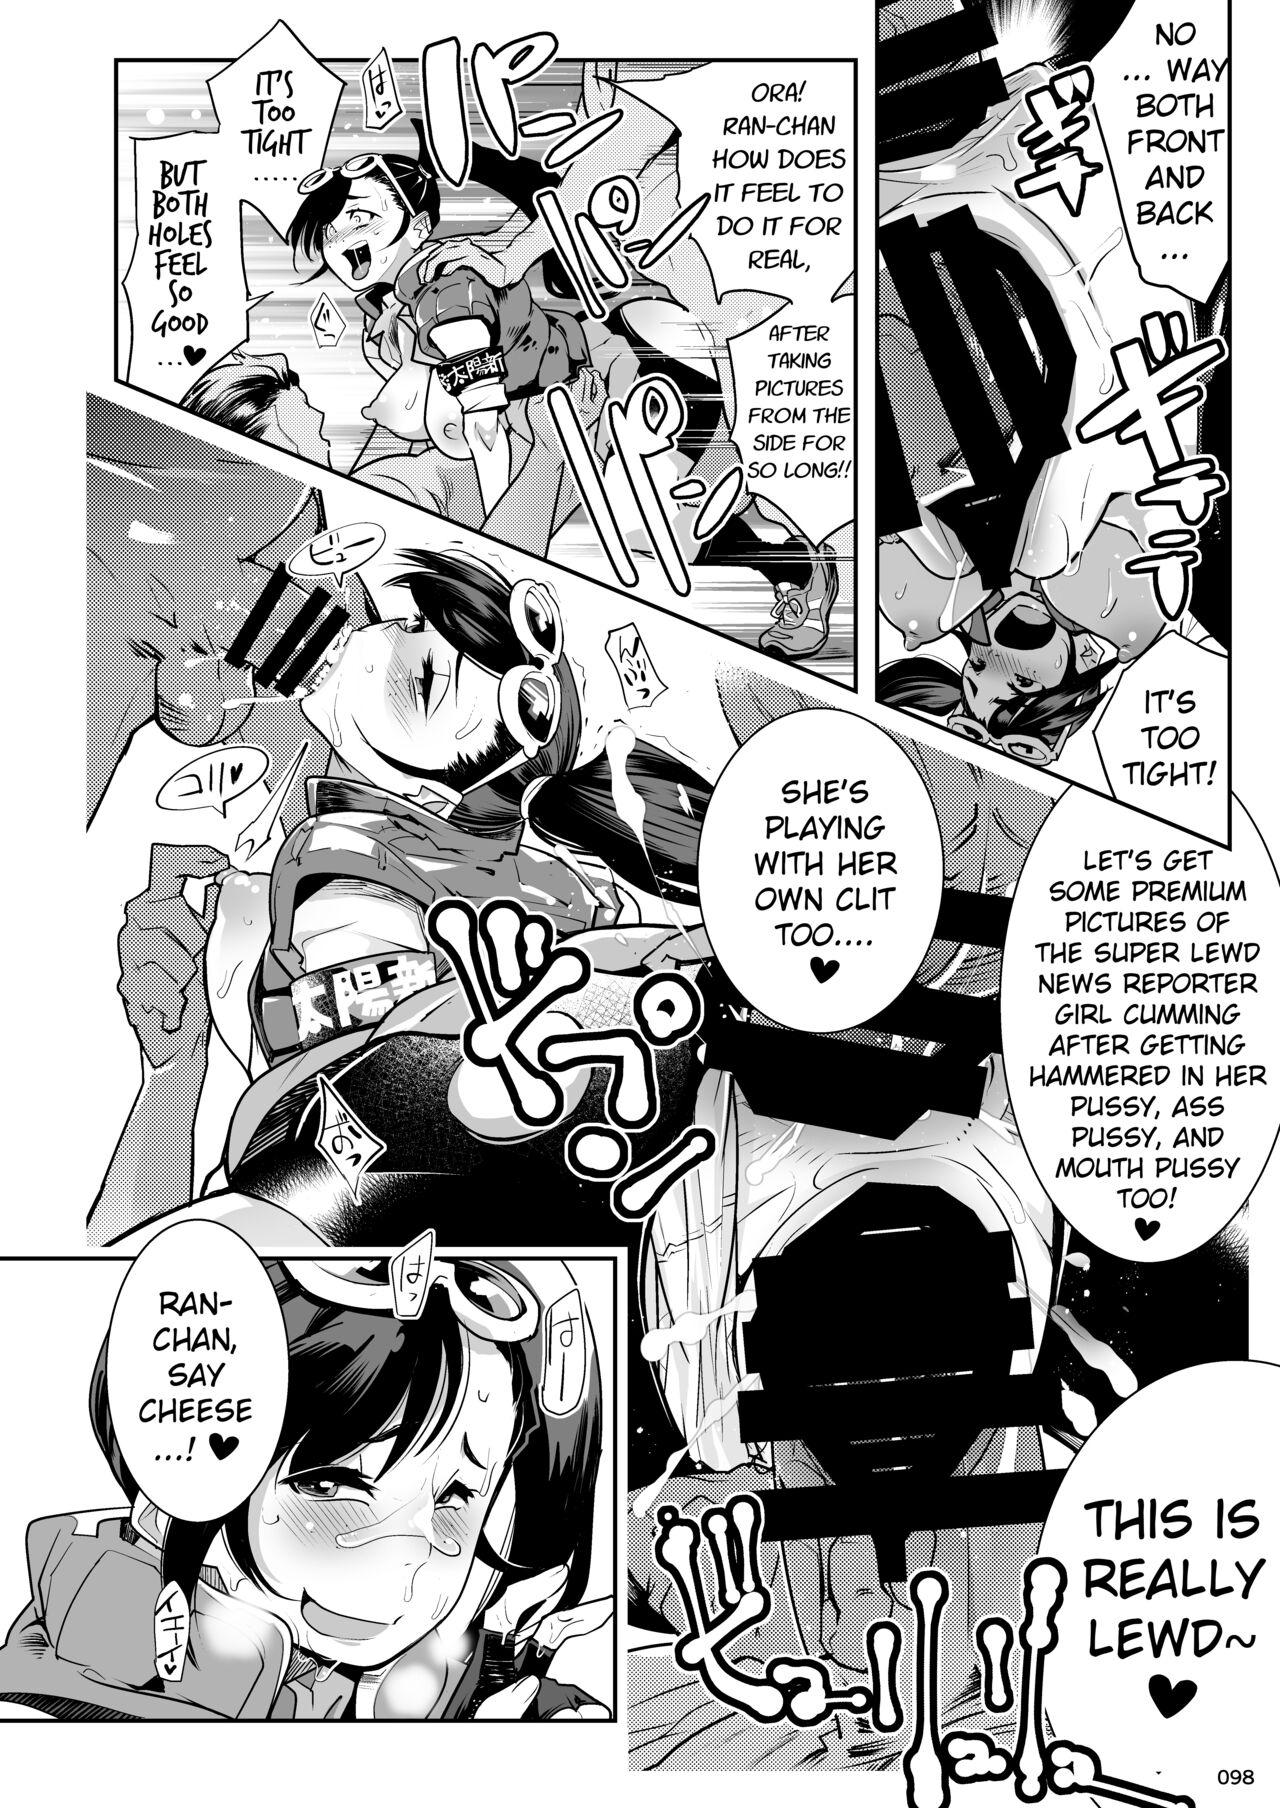 Free Blowjobs SFJK Playback - Heisei Fighting Game Gangbang Orgy Playback - Street fighter Milf Fuck - Page 6